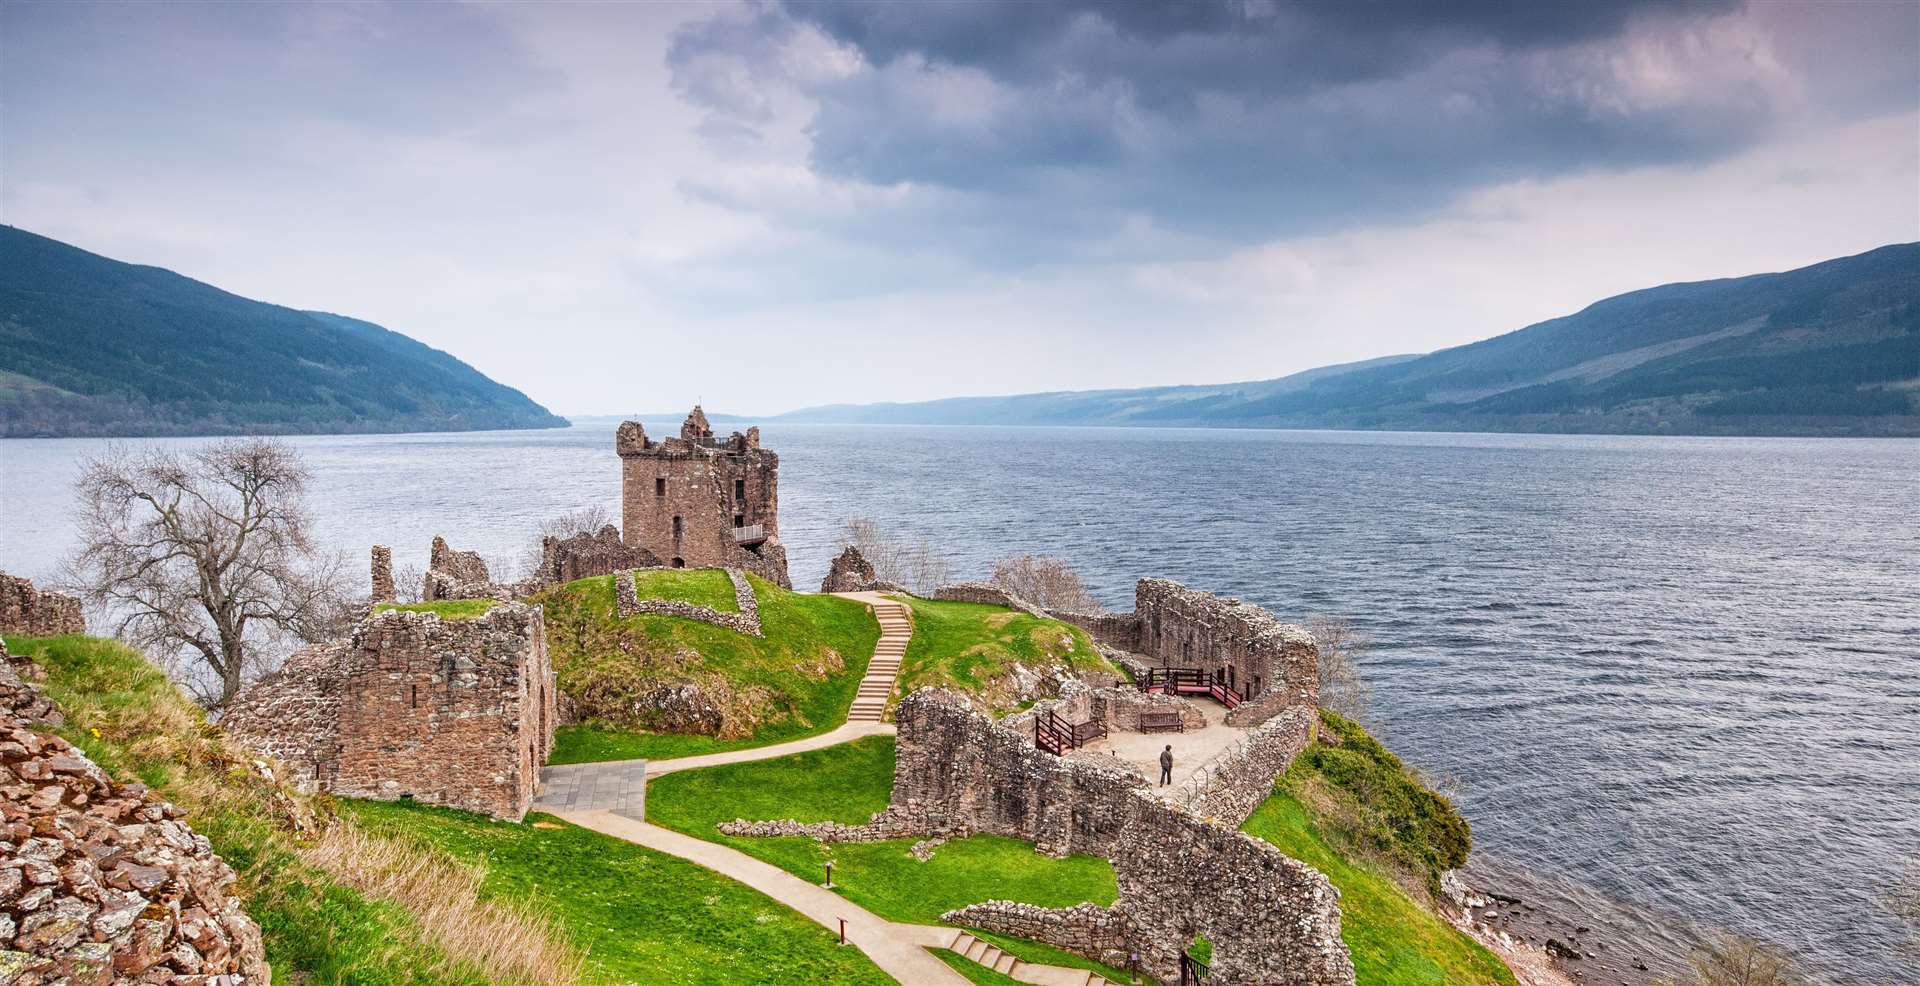 Loch Ness from Urquhart castle, where Parry Malm made his Loch Ness monster "sighting".